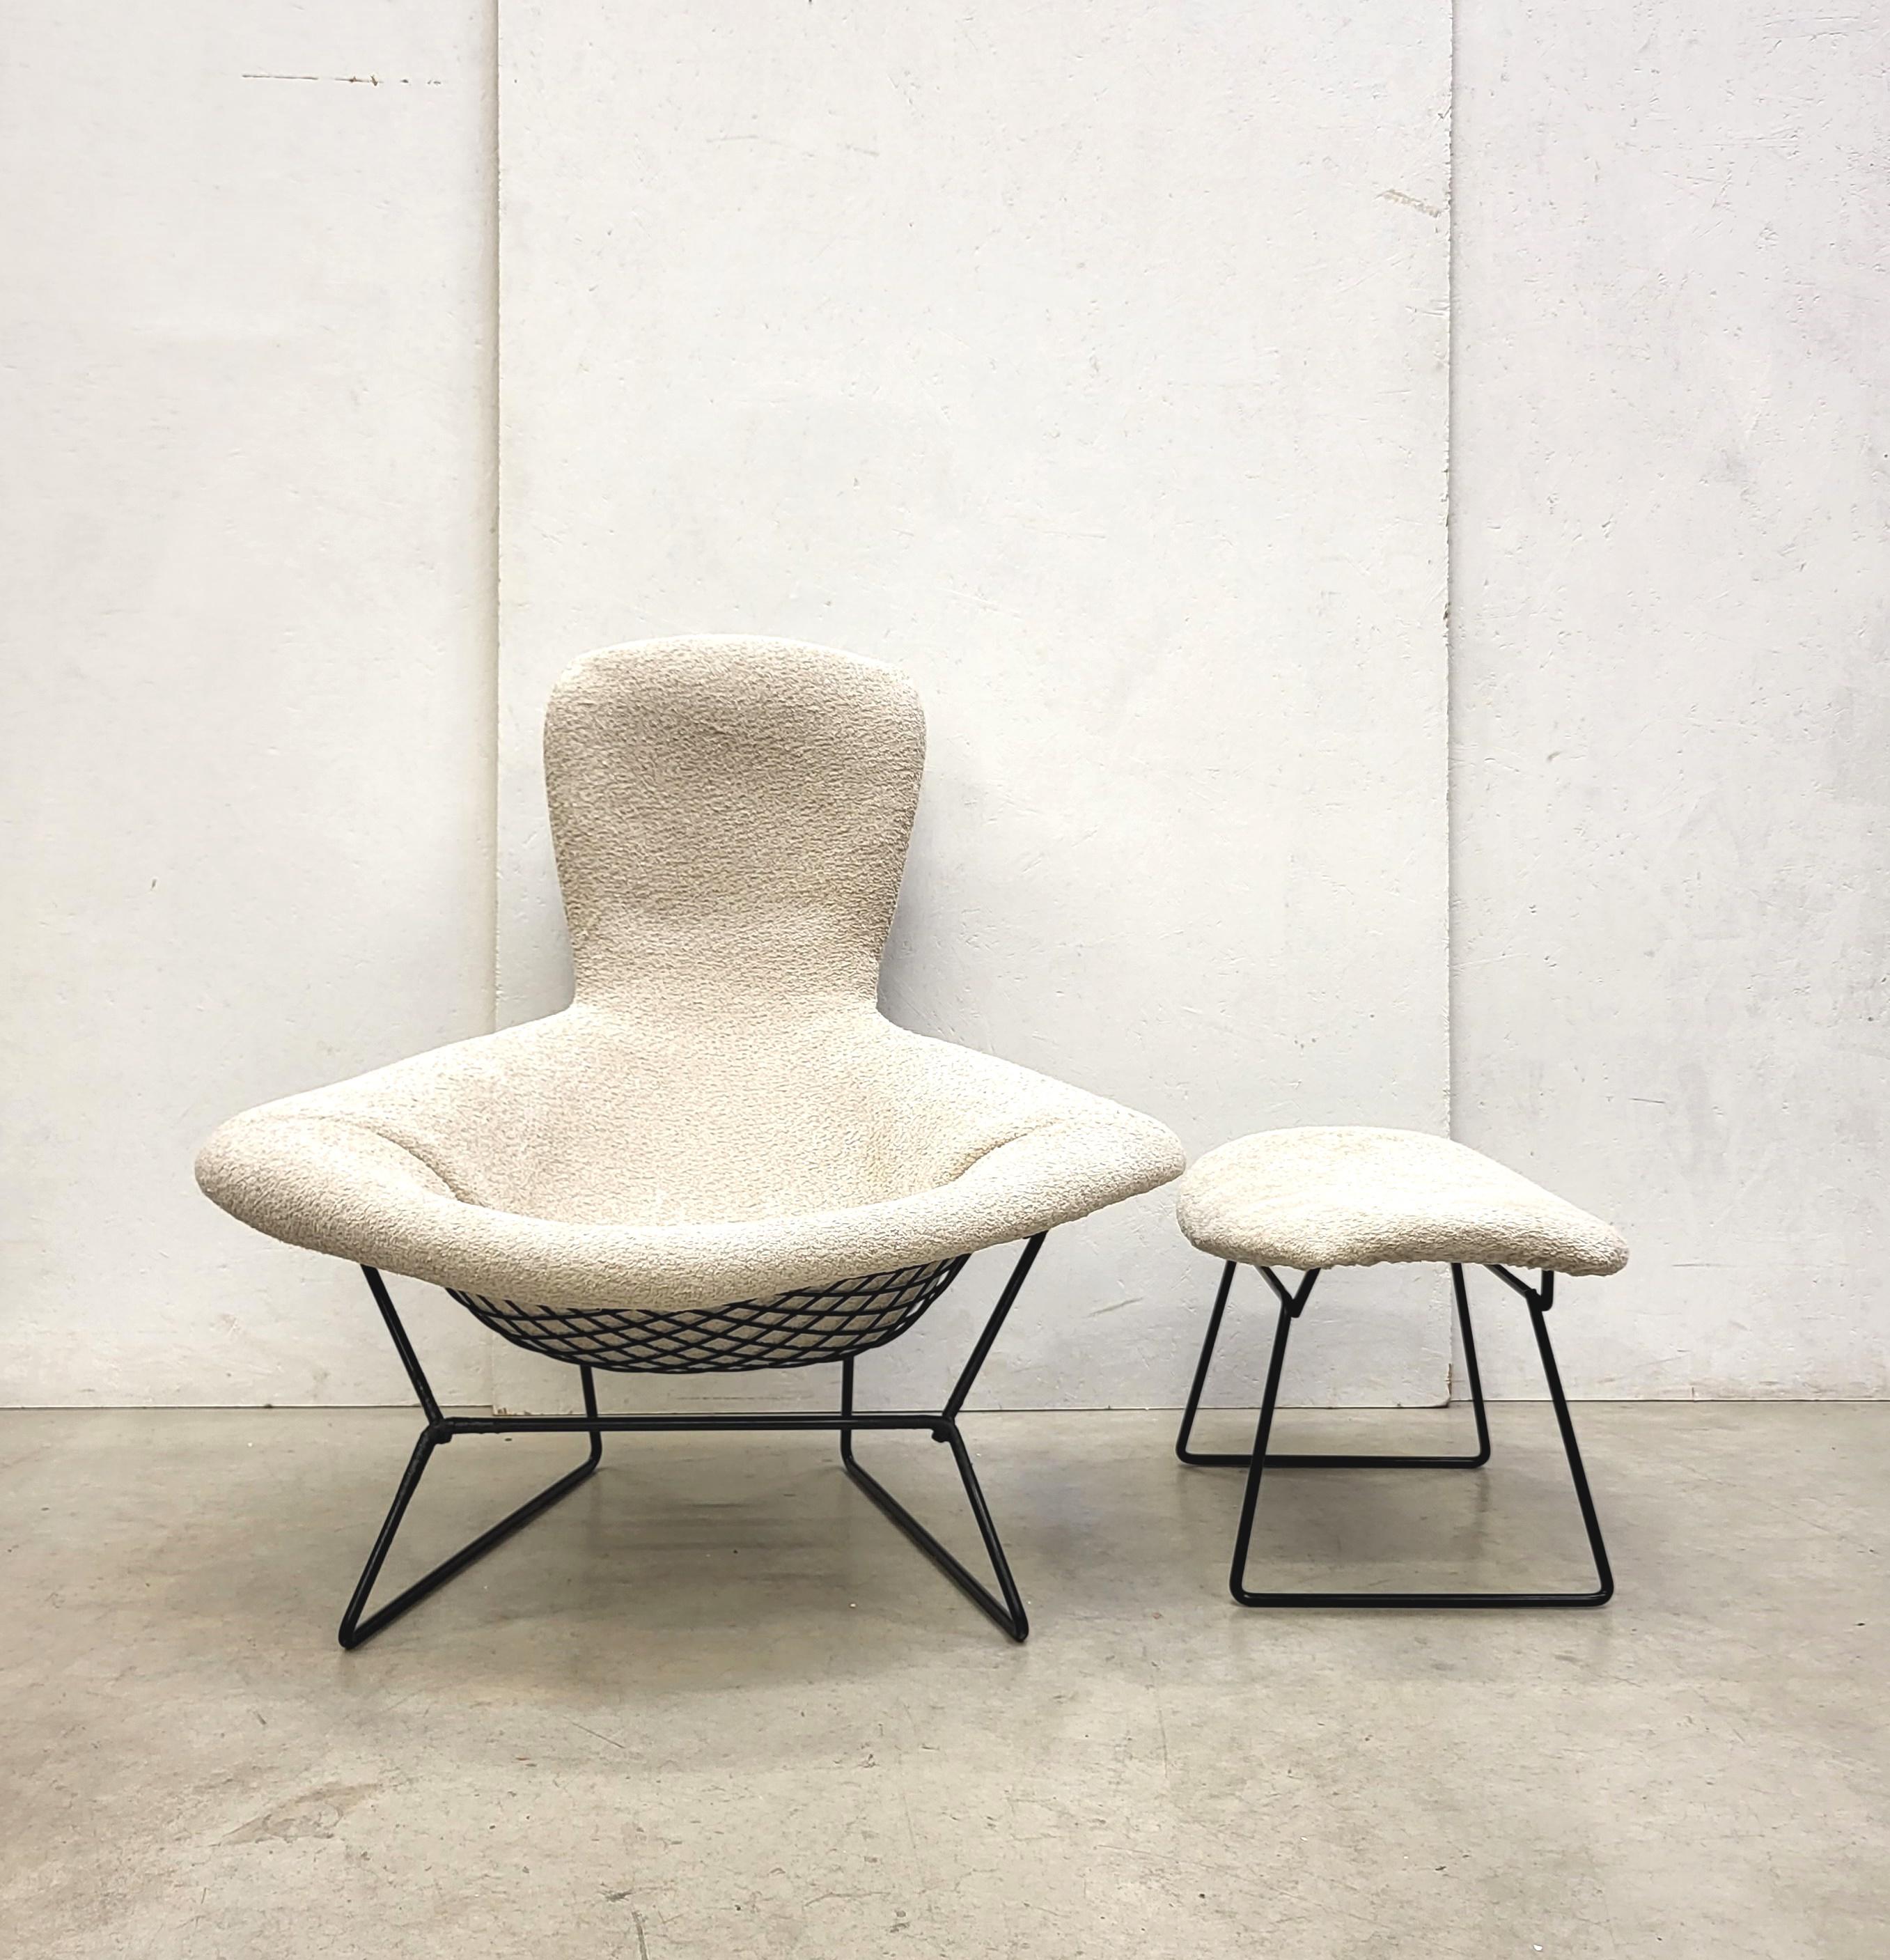 Early Bouclé wool edition Bird chair & ottoman by Harry Bertoia for Knoll. 

The groundbreaking Bird chair was designed in the 50s by Harry Bertoia and made by Knoll.
This mid-century classic supports countless positions and offers a comforting